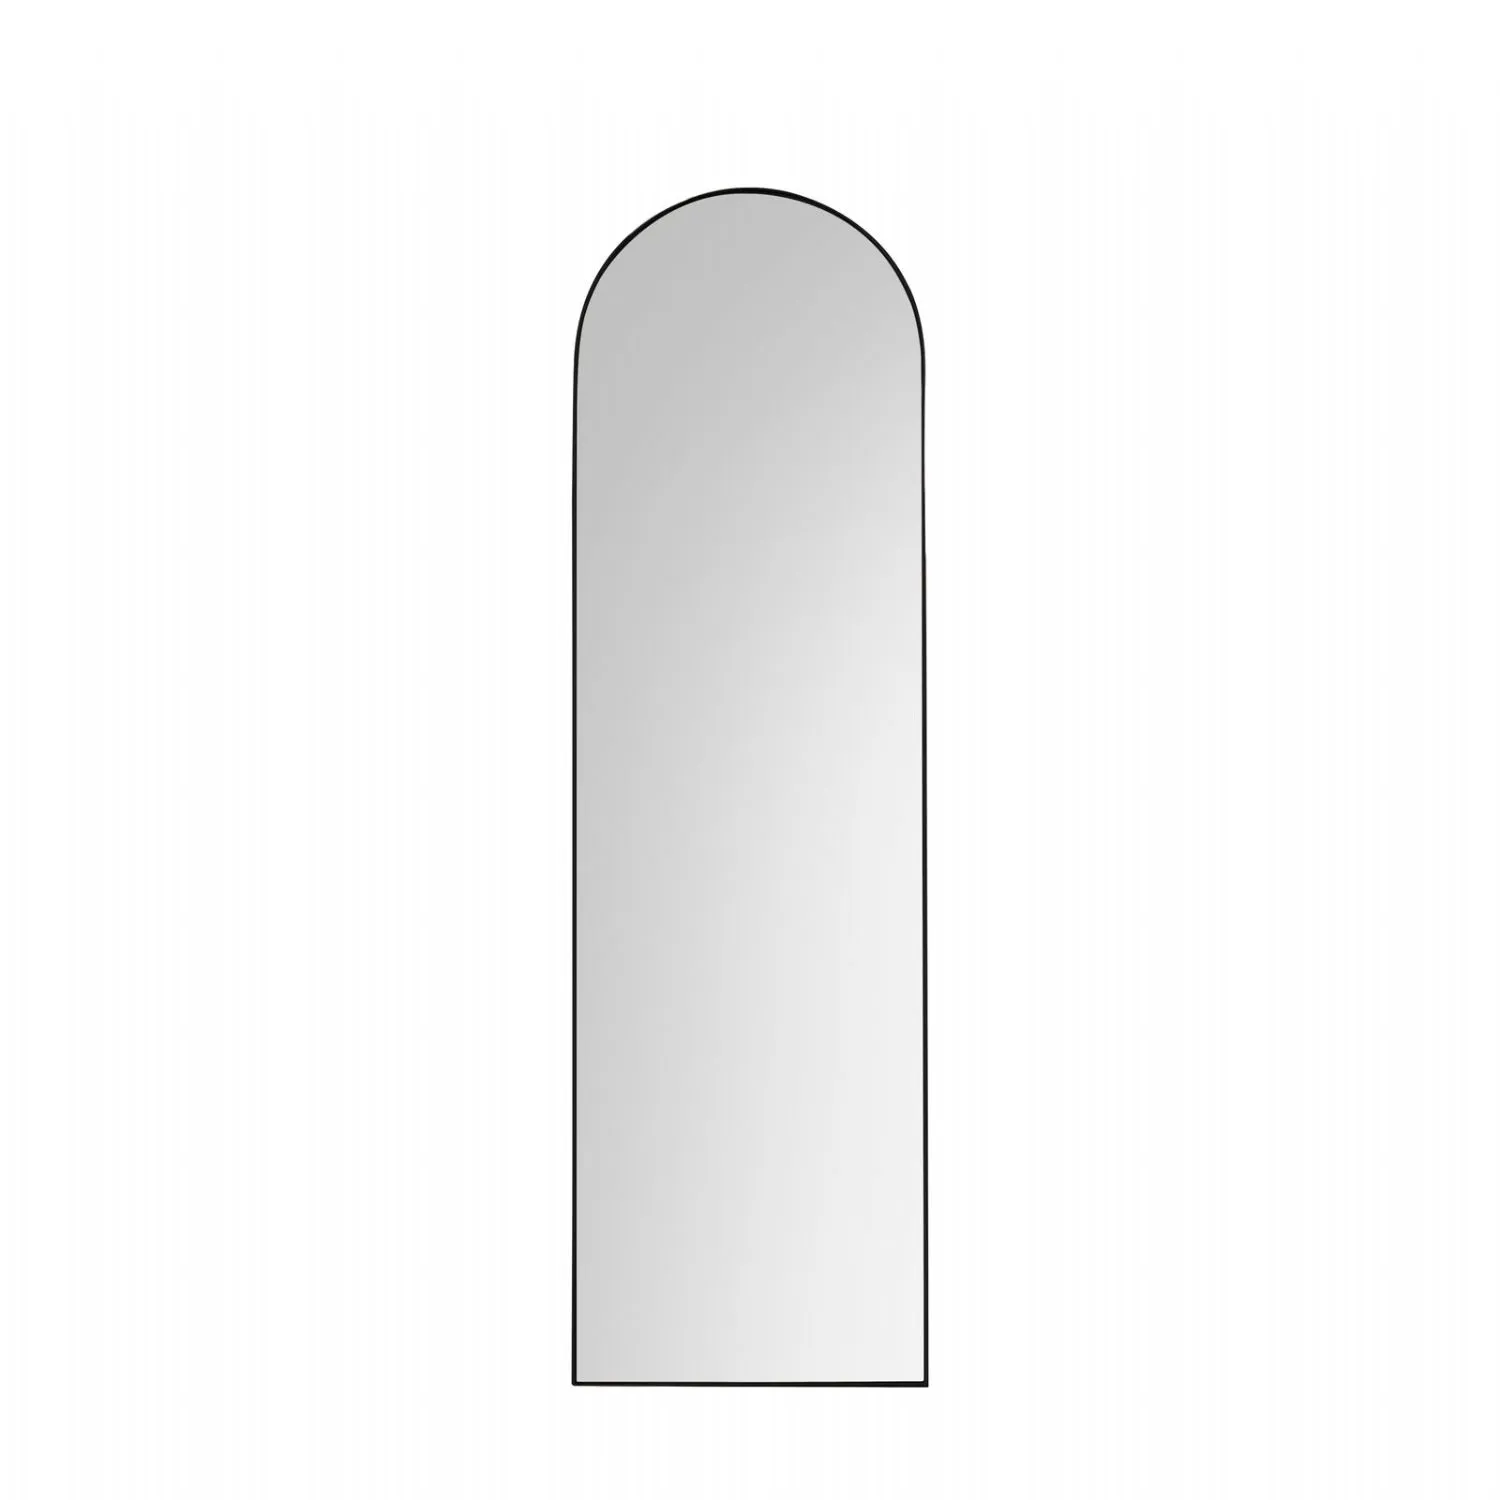 Large Arched Metal Wall Mirror Black Frame 170cm Tall